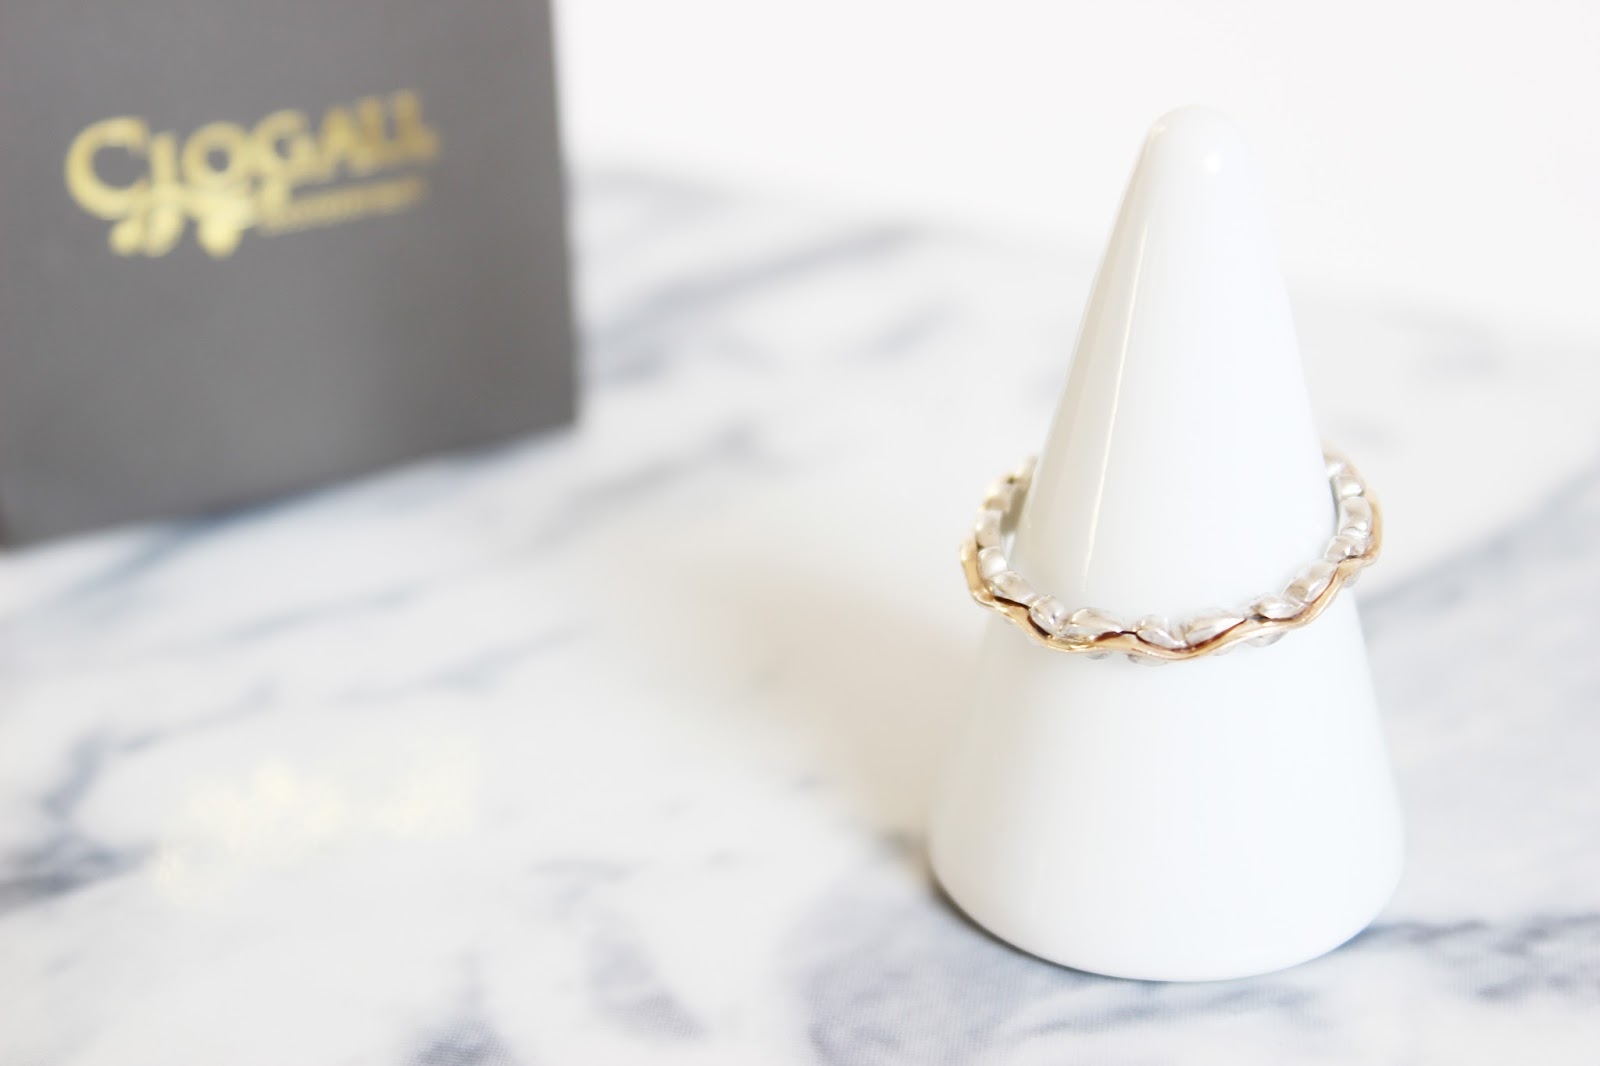 The Unique Stacker Ring From Clogau